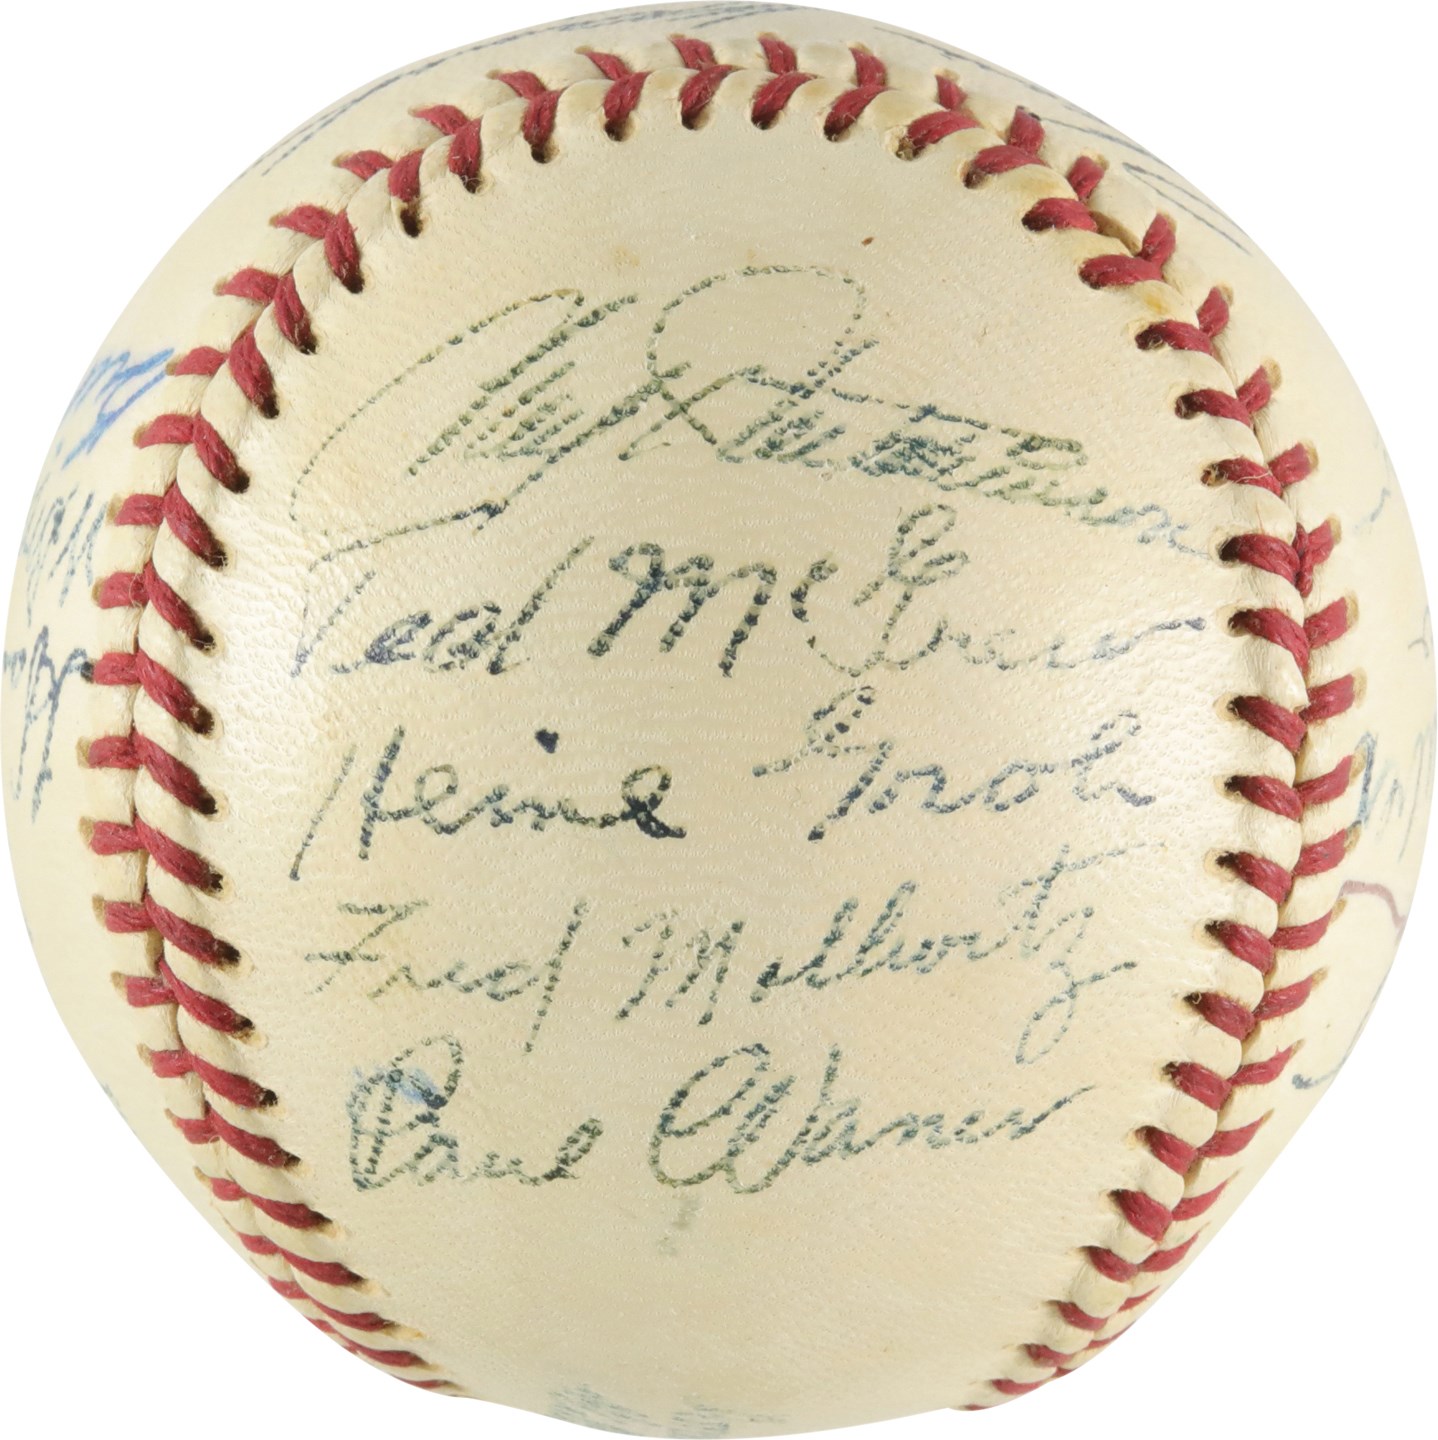 - High Grade 1950s Hall of Famers and Stars Signed Baseball w/Paul Waner